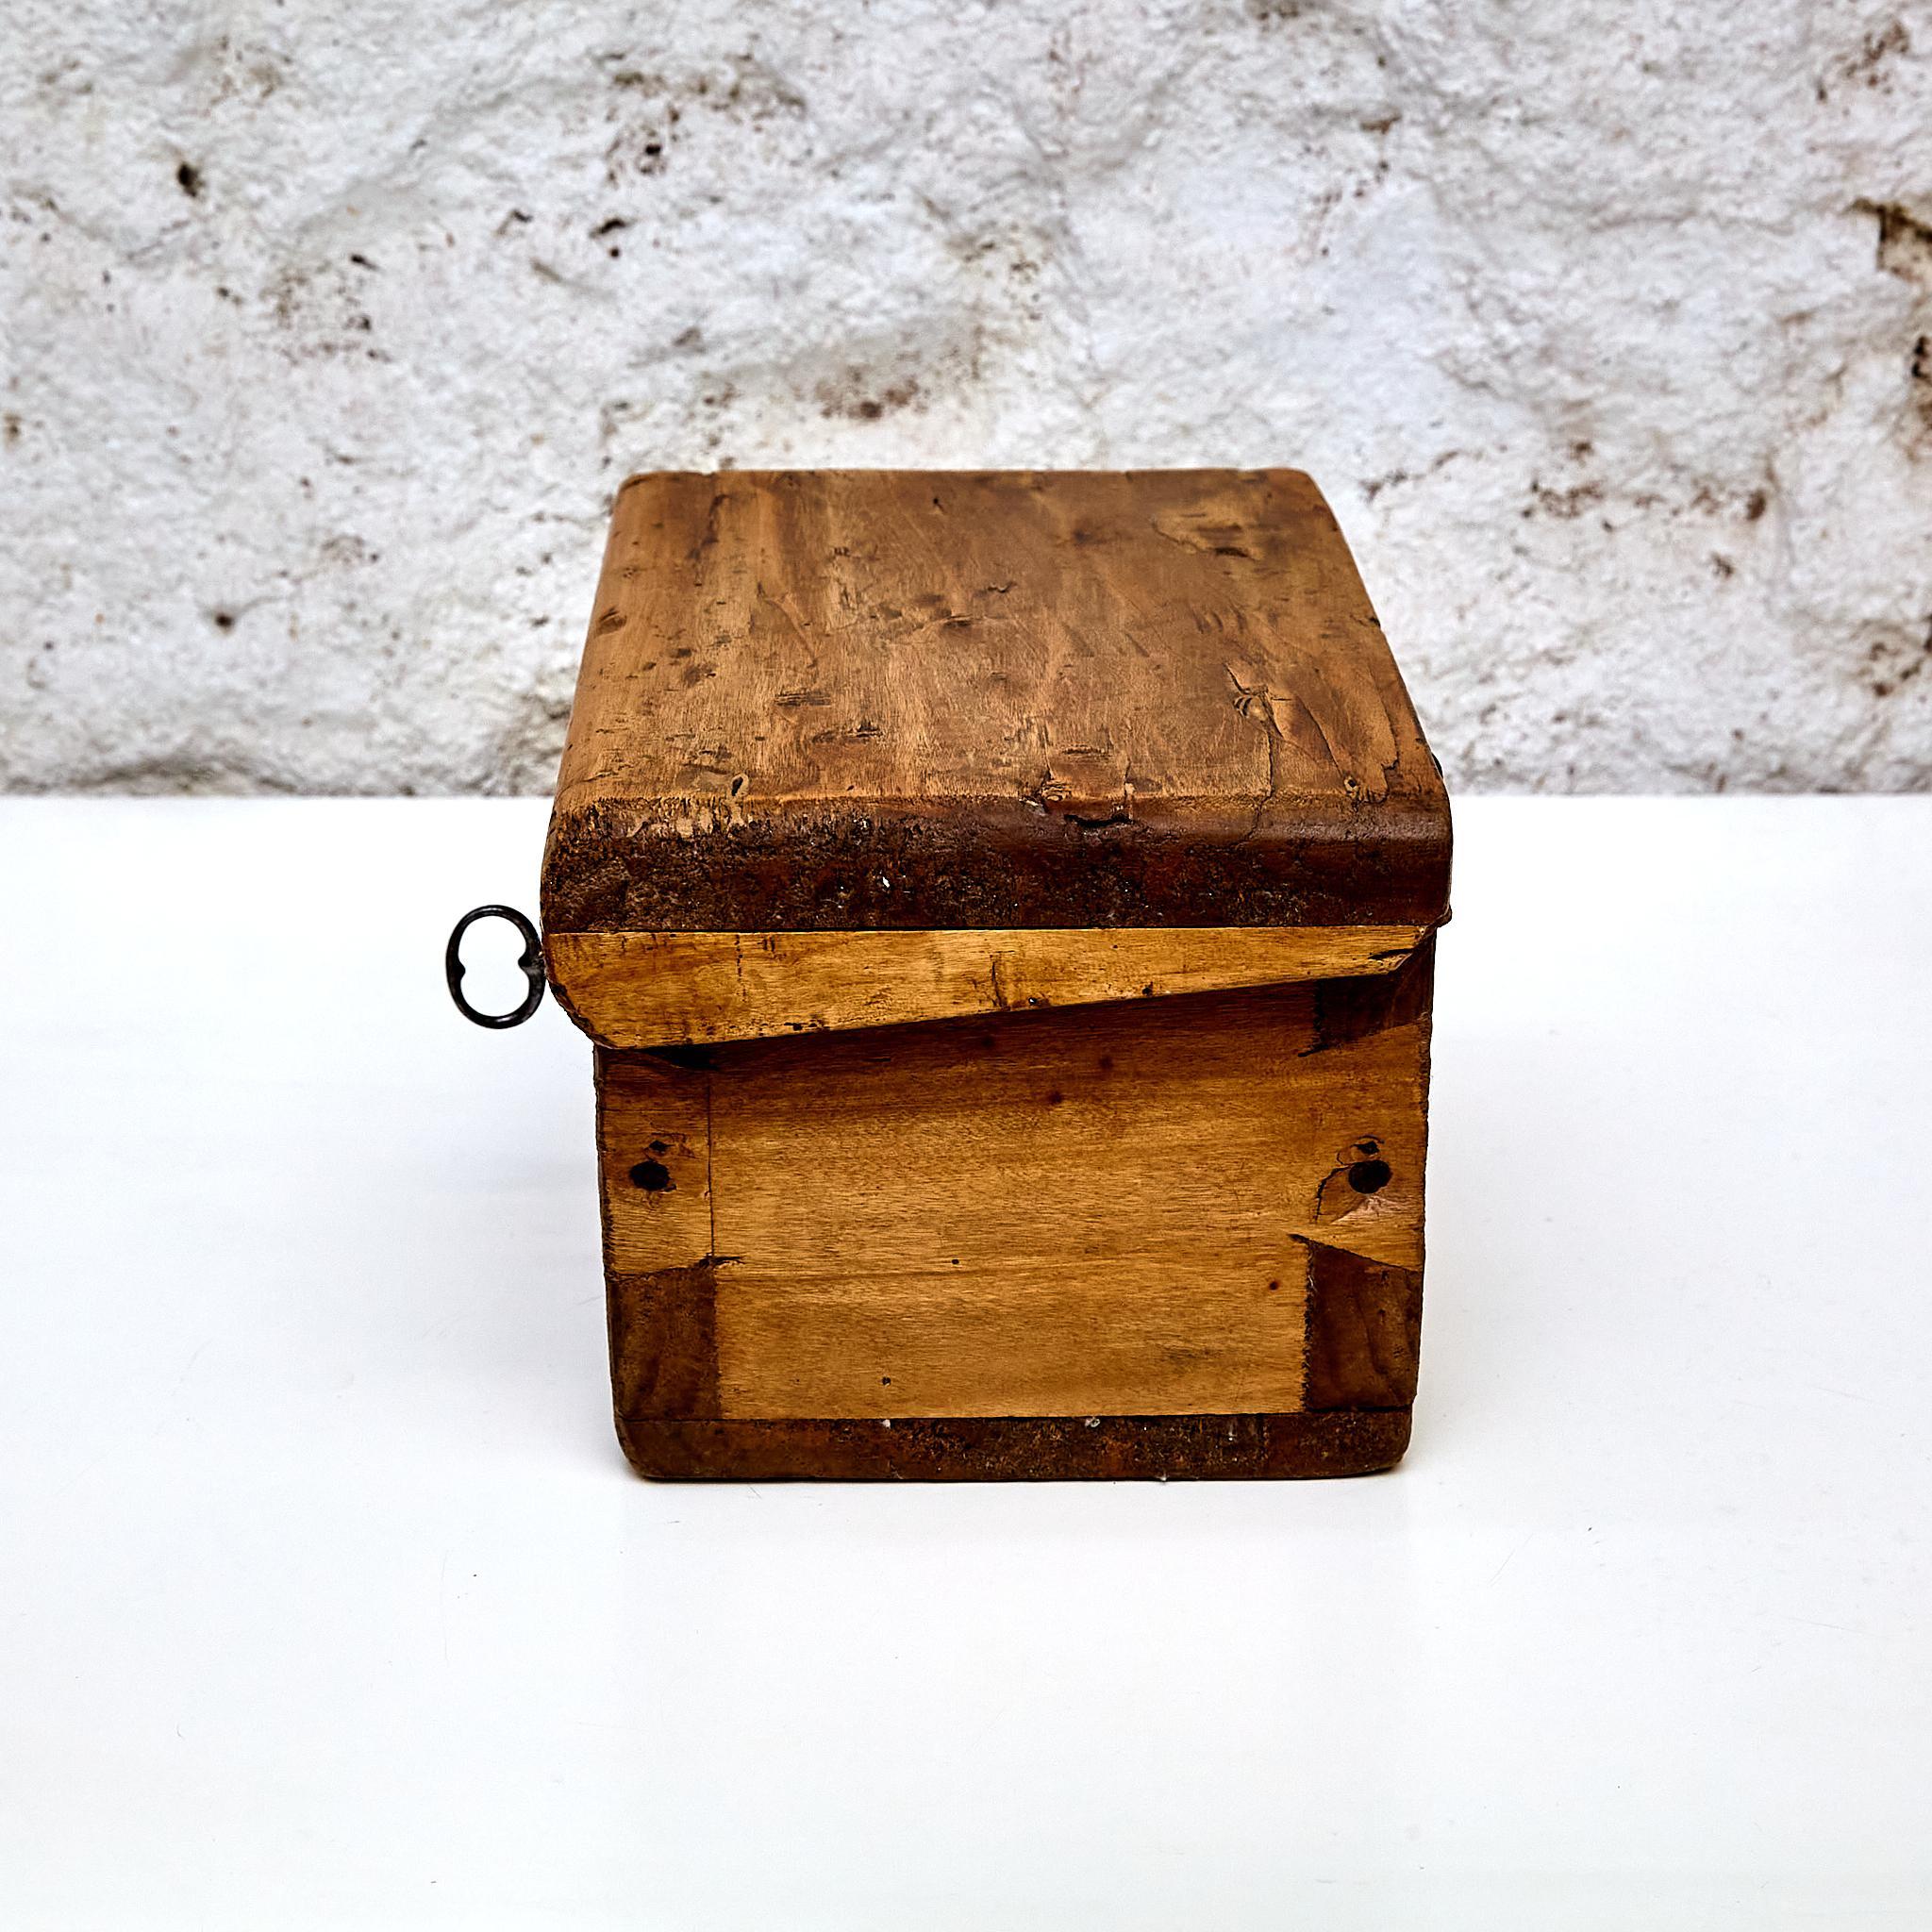 Primitive Rustic Wood Box with Key Lock, circa 1930 For Sale